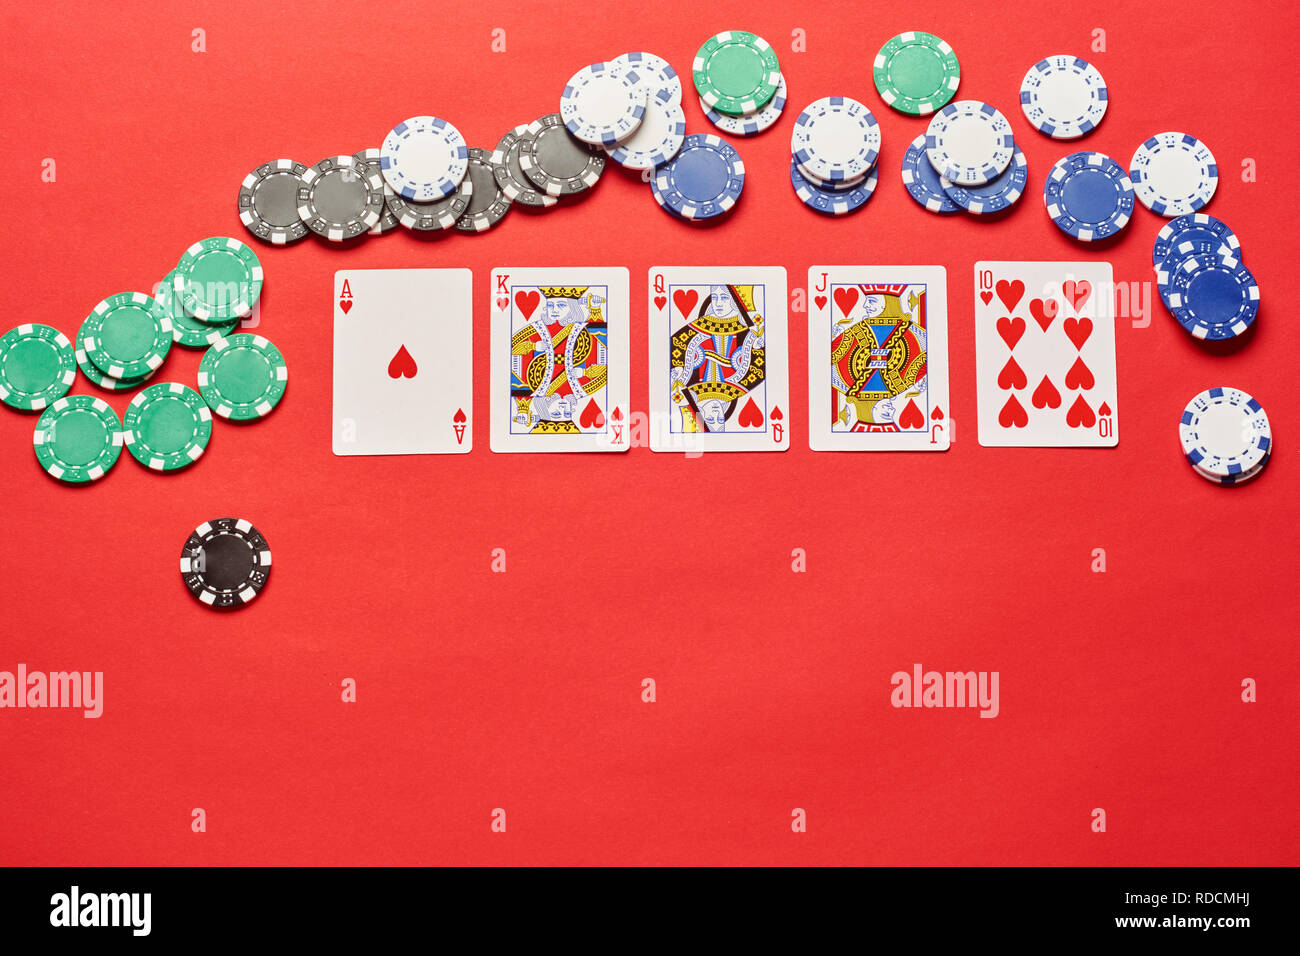 Poker Hands Flush. Five playing cards - the poker royal flush hand. Poker chips on red casino table. success in gambling. Flat background Stock Photo - Alamy